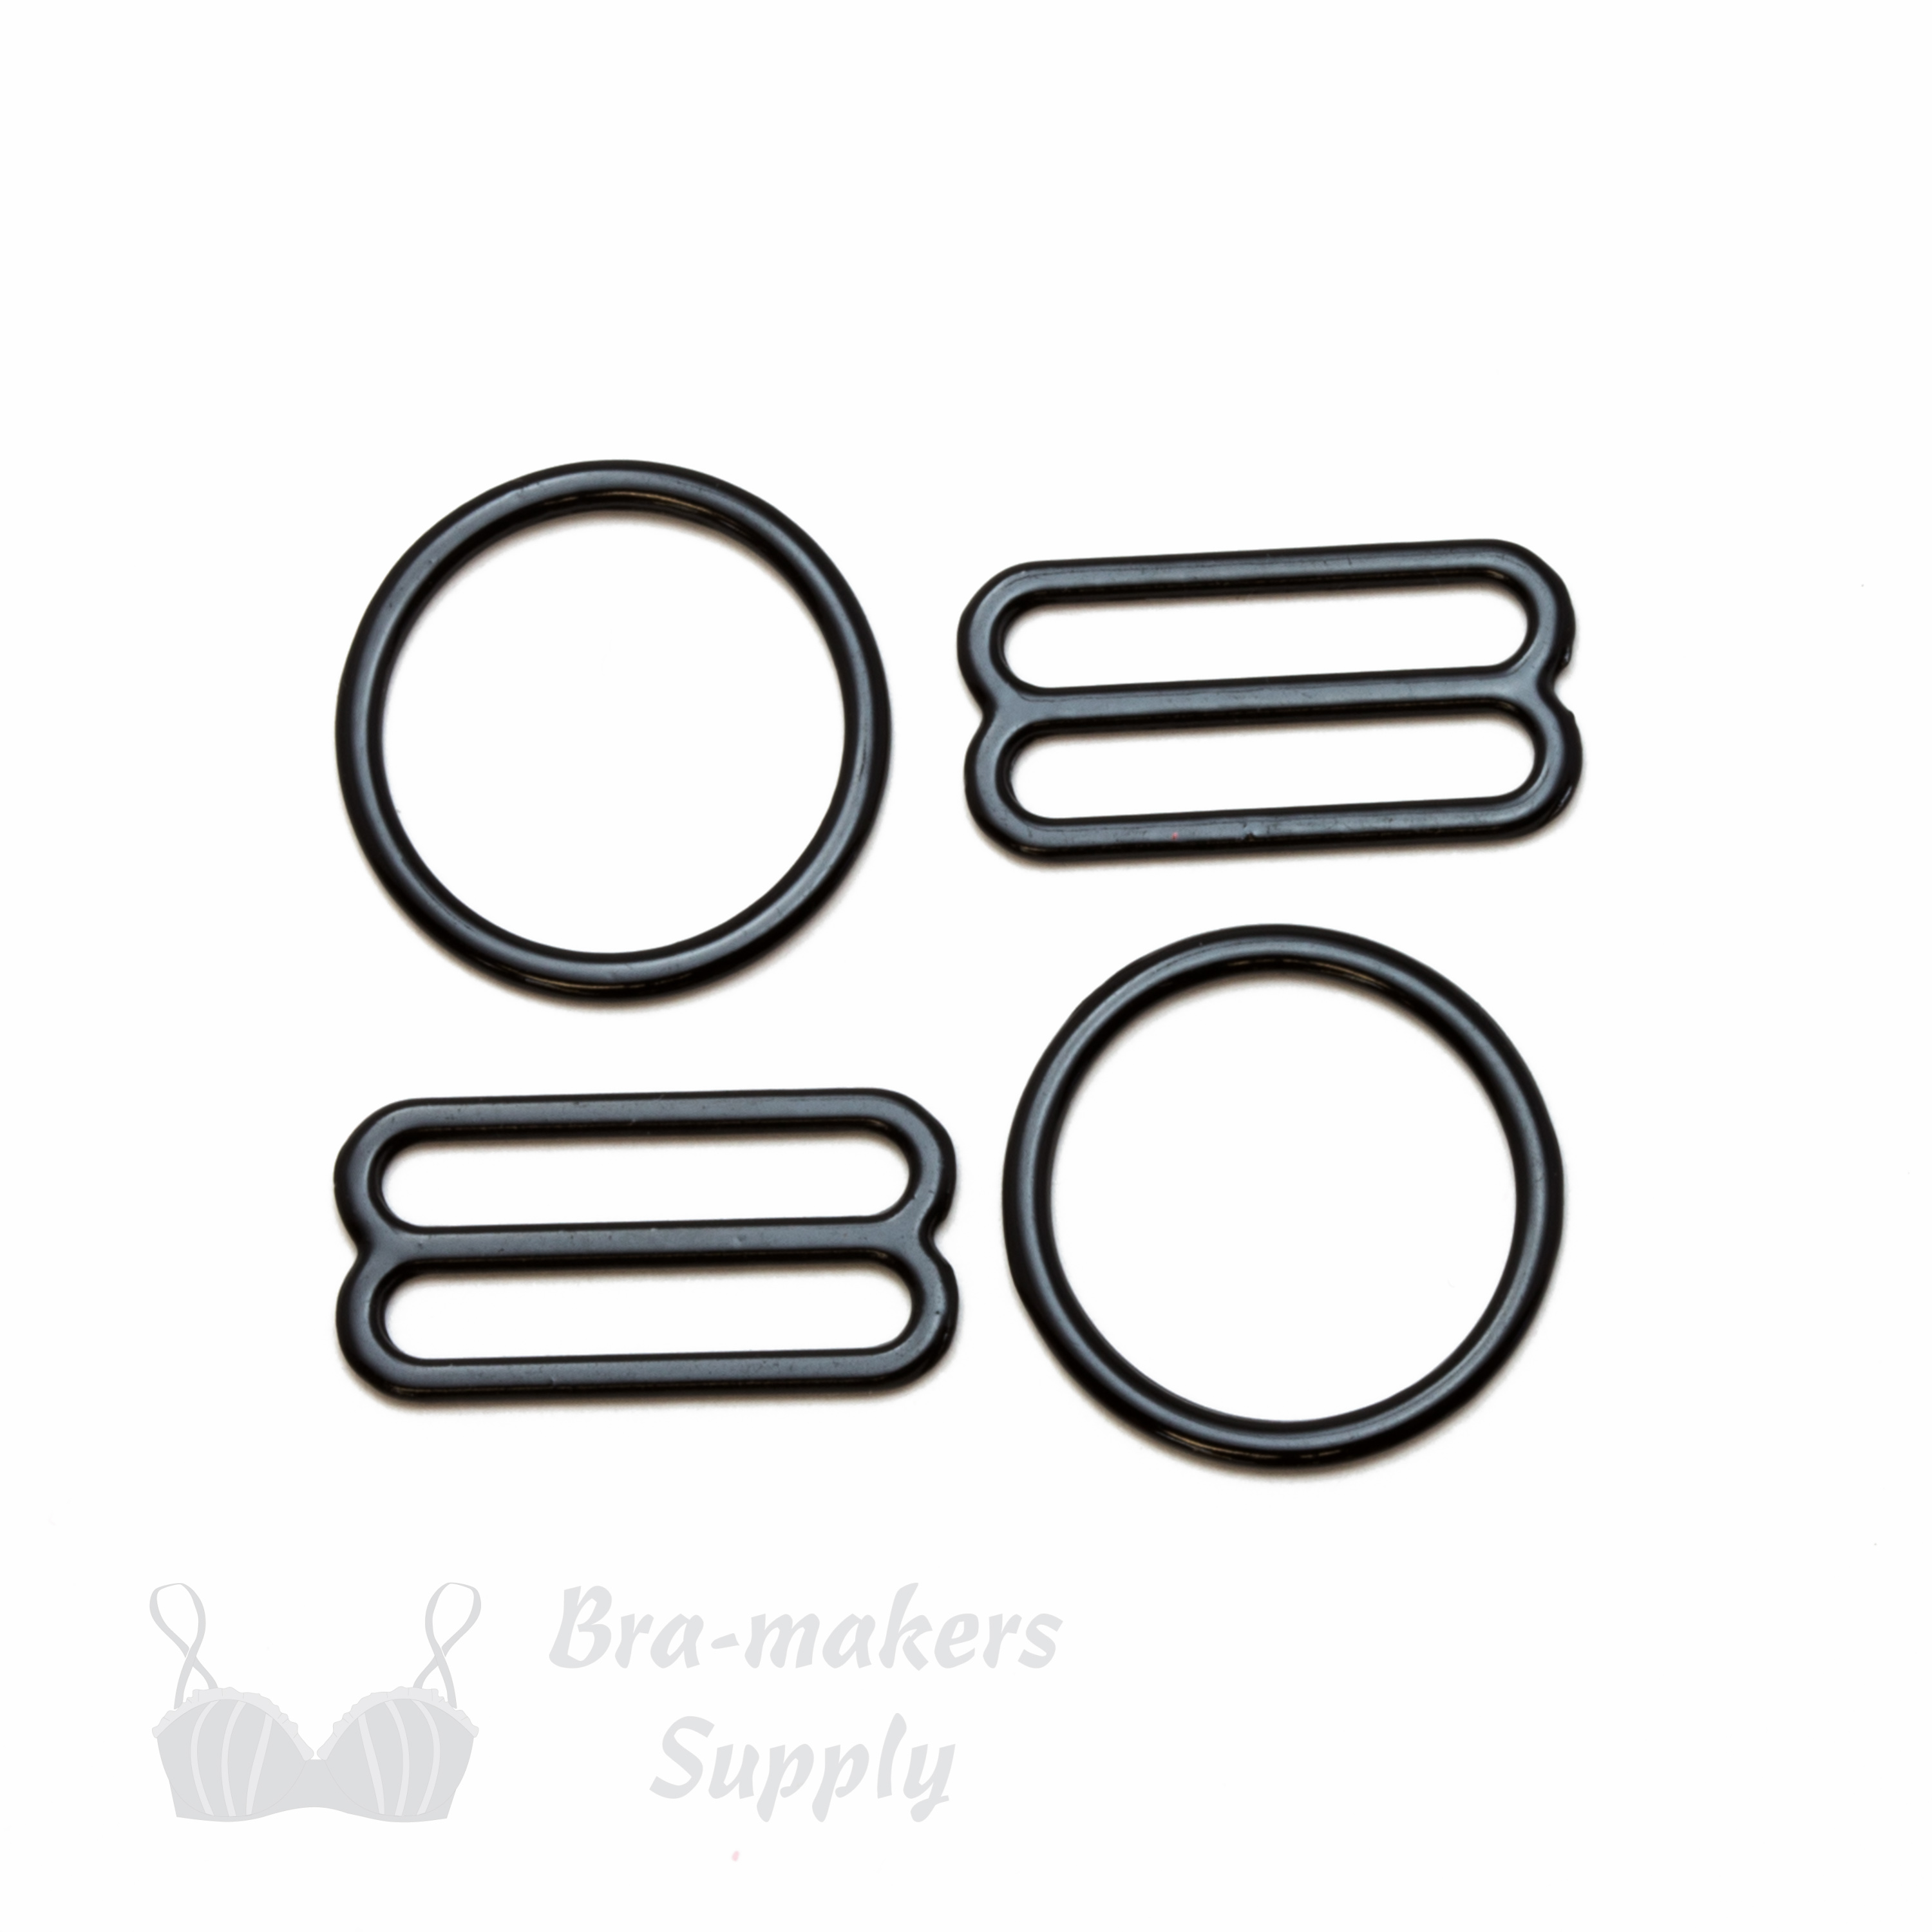 one inch 22mm RM-8 black nylon coated metal rings sliders or anthracite Pantone 19-4007 from Bra-Makers Supply 2 sliders 2 rings shown